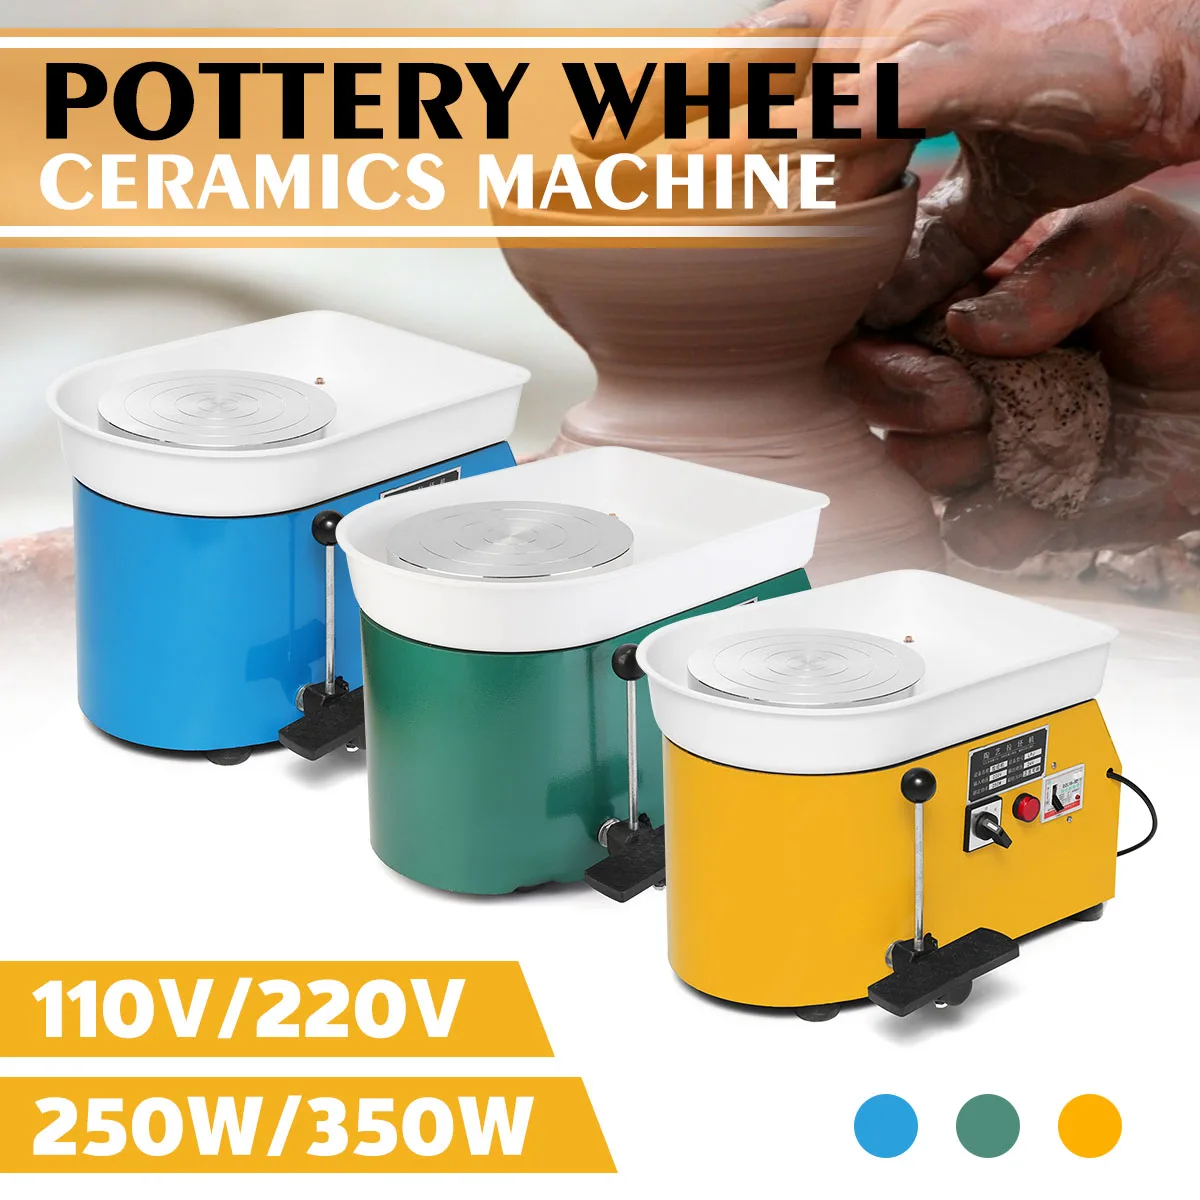 

3 Colors 110V/220V Pottery Forming Machine 250W/350W Electric Pottery Wheel DIY Clay Tool With Tray For Ceramic Work Ceramics